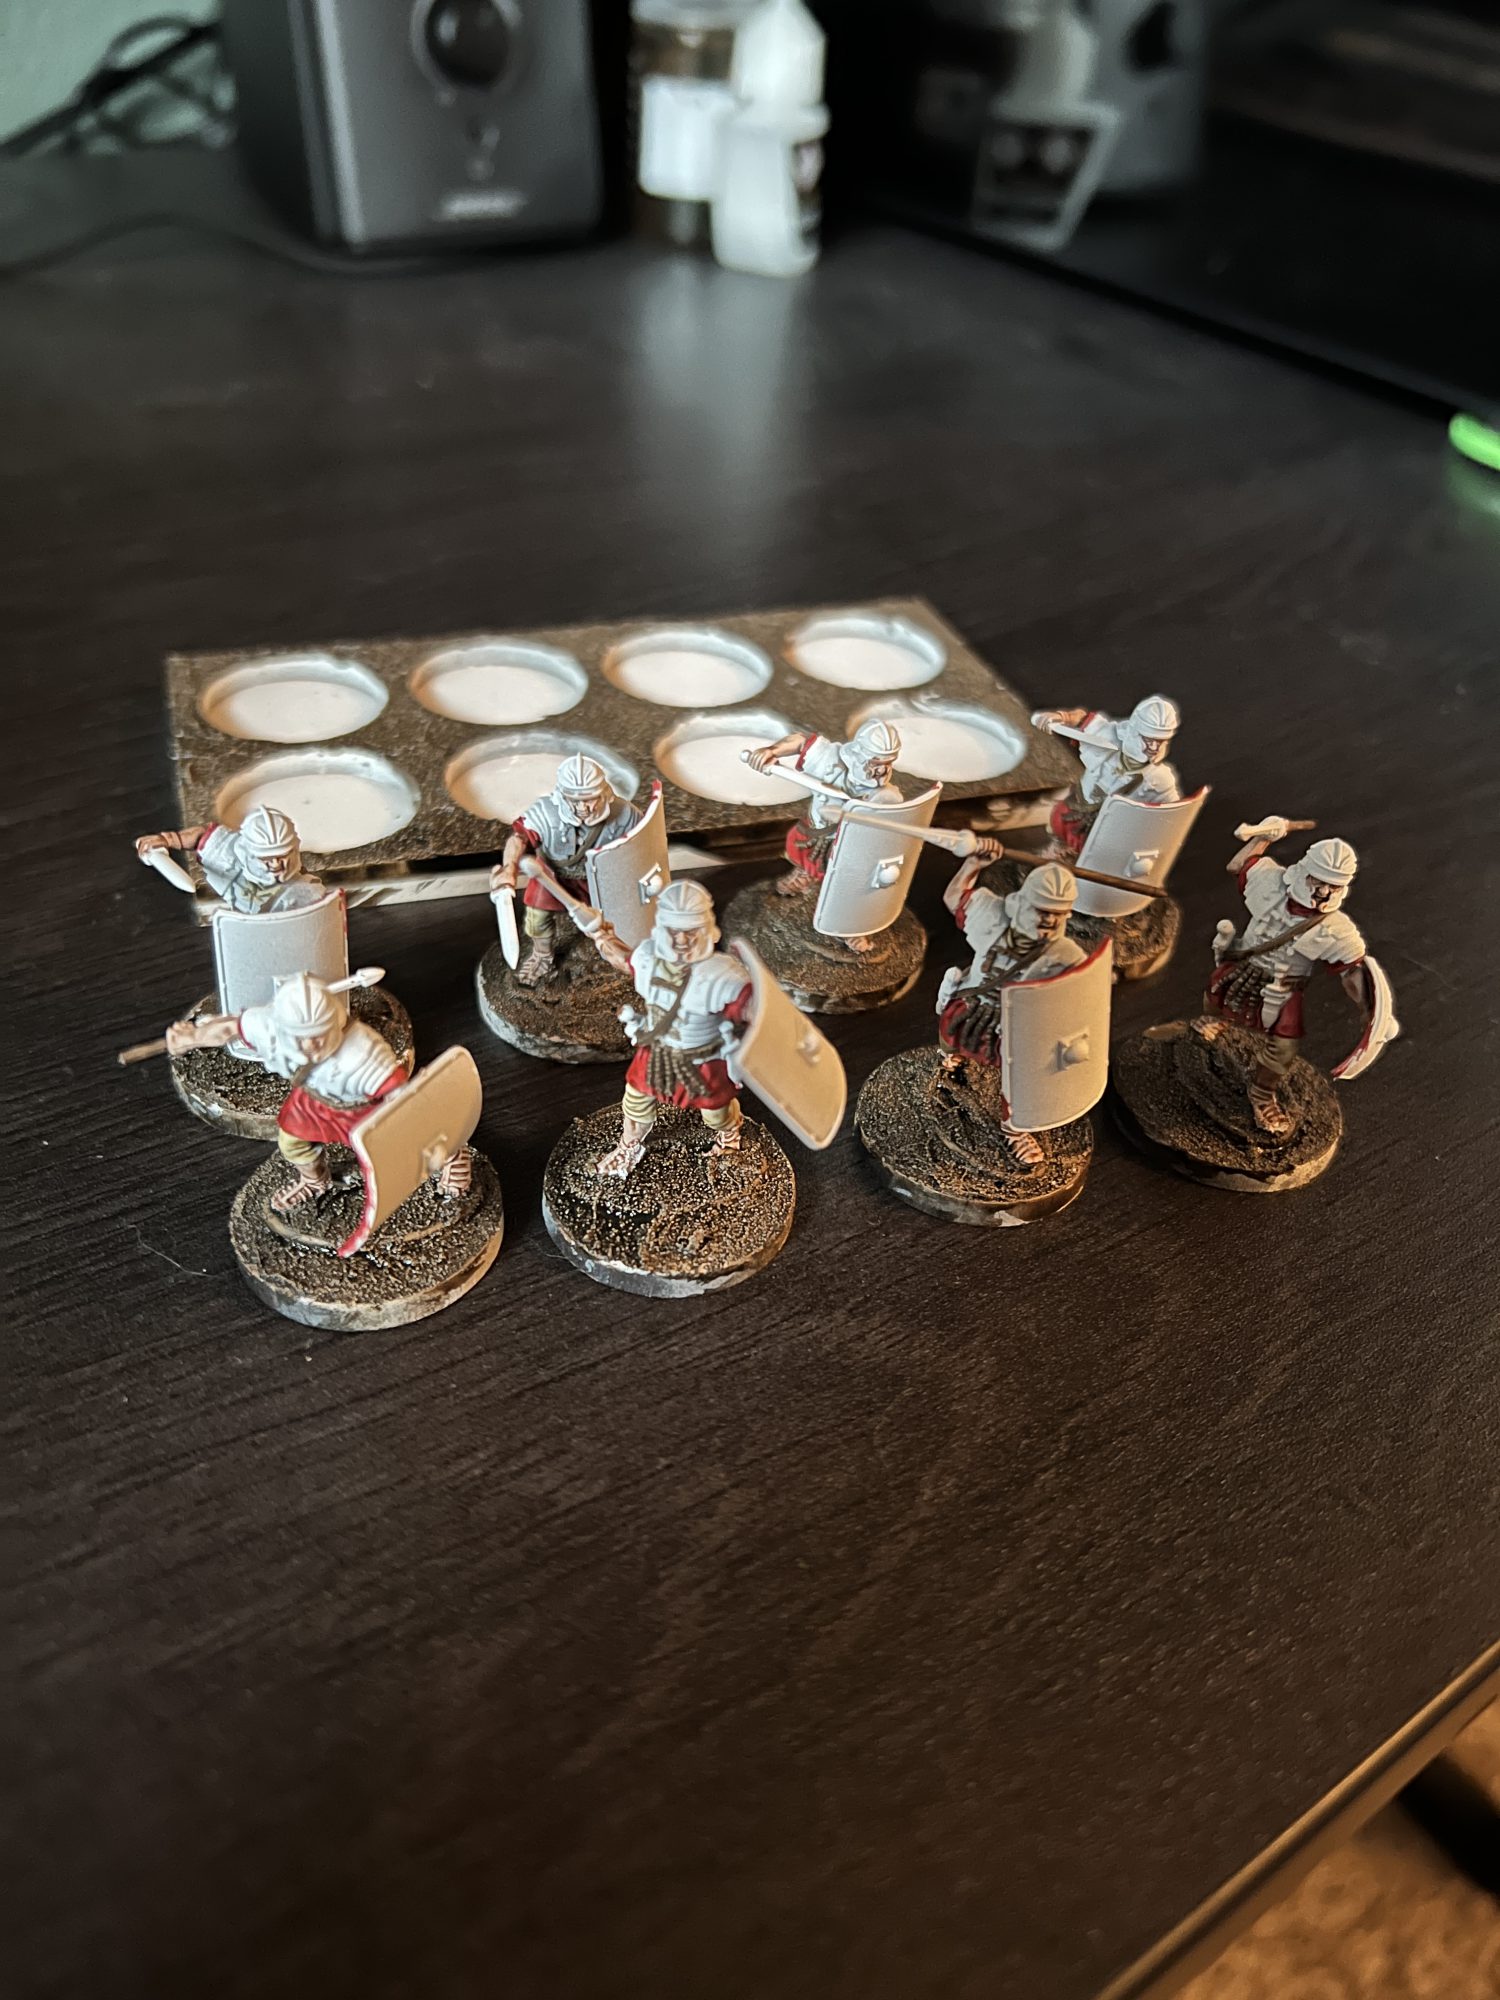 Eight miniature Roman Legionnaires mounted on circle bases in the process of being painted.